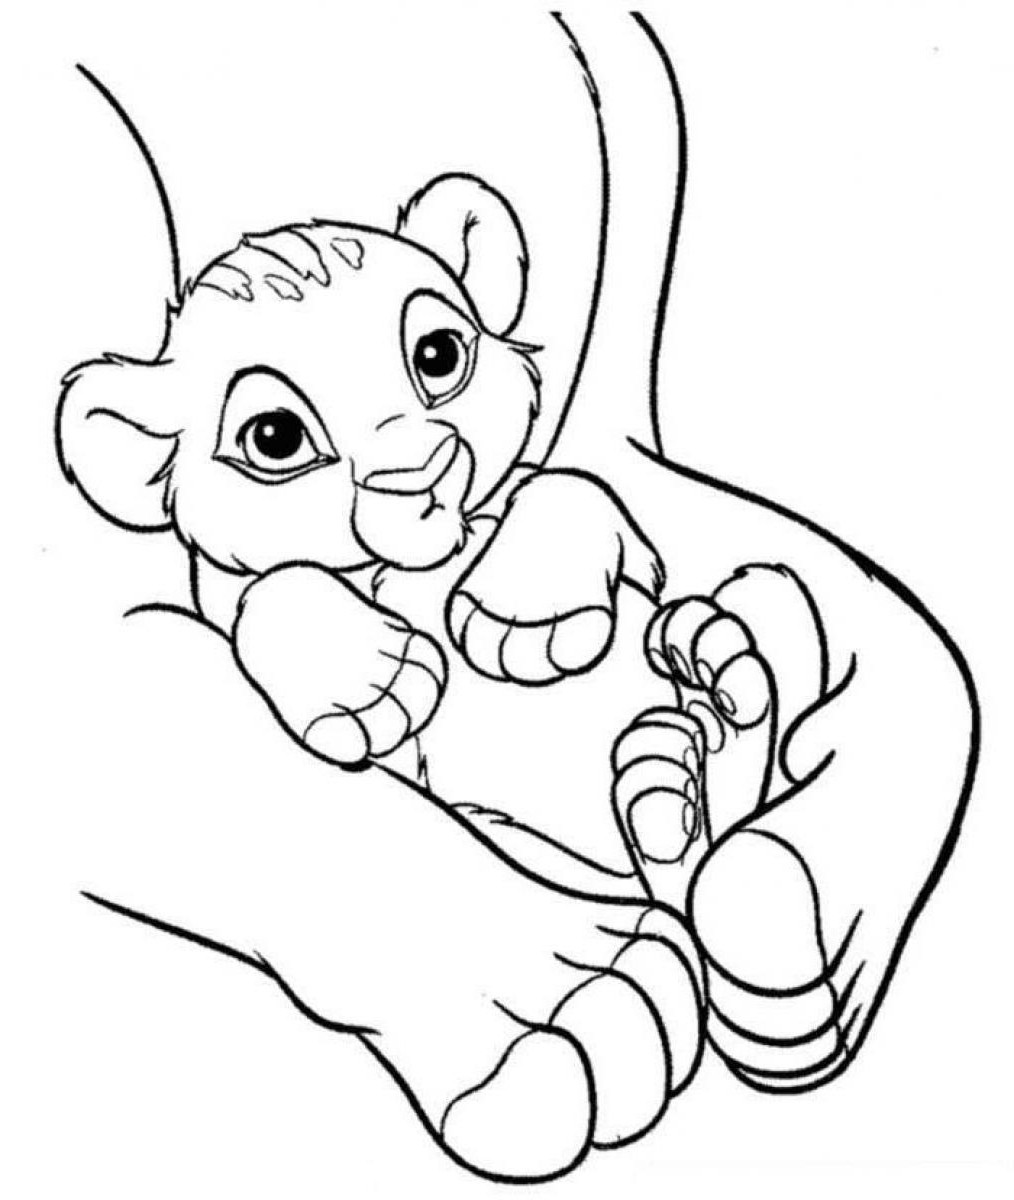 Baby Lion Coloring Page
 Unicornio Vector at GetDrawings